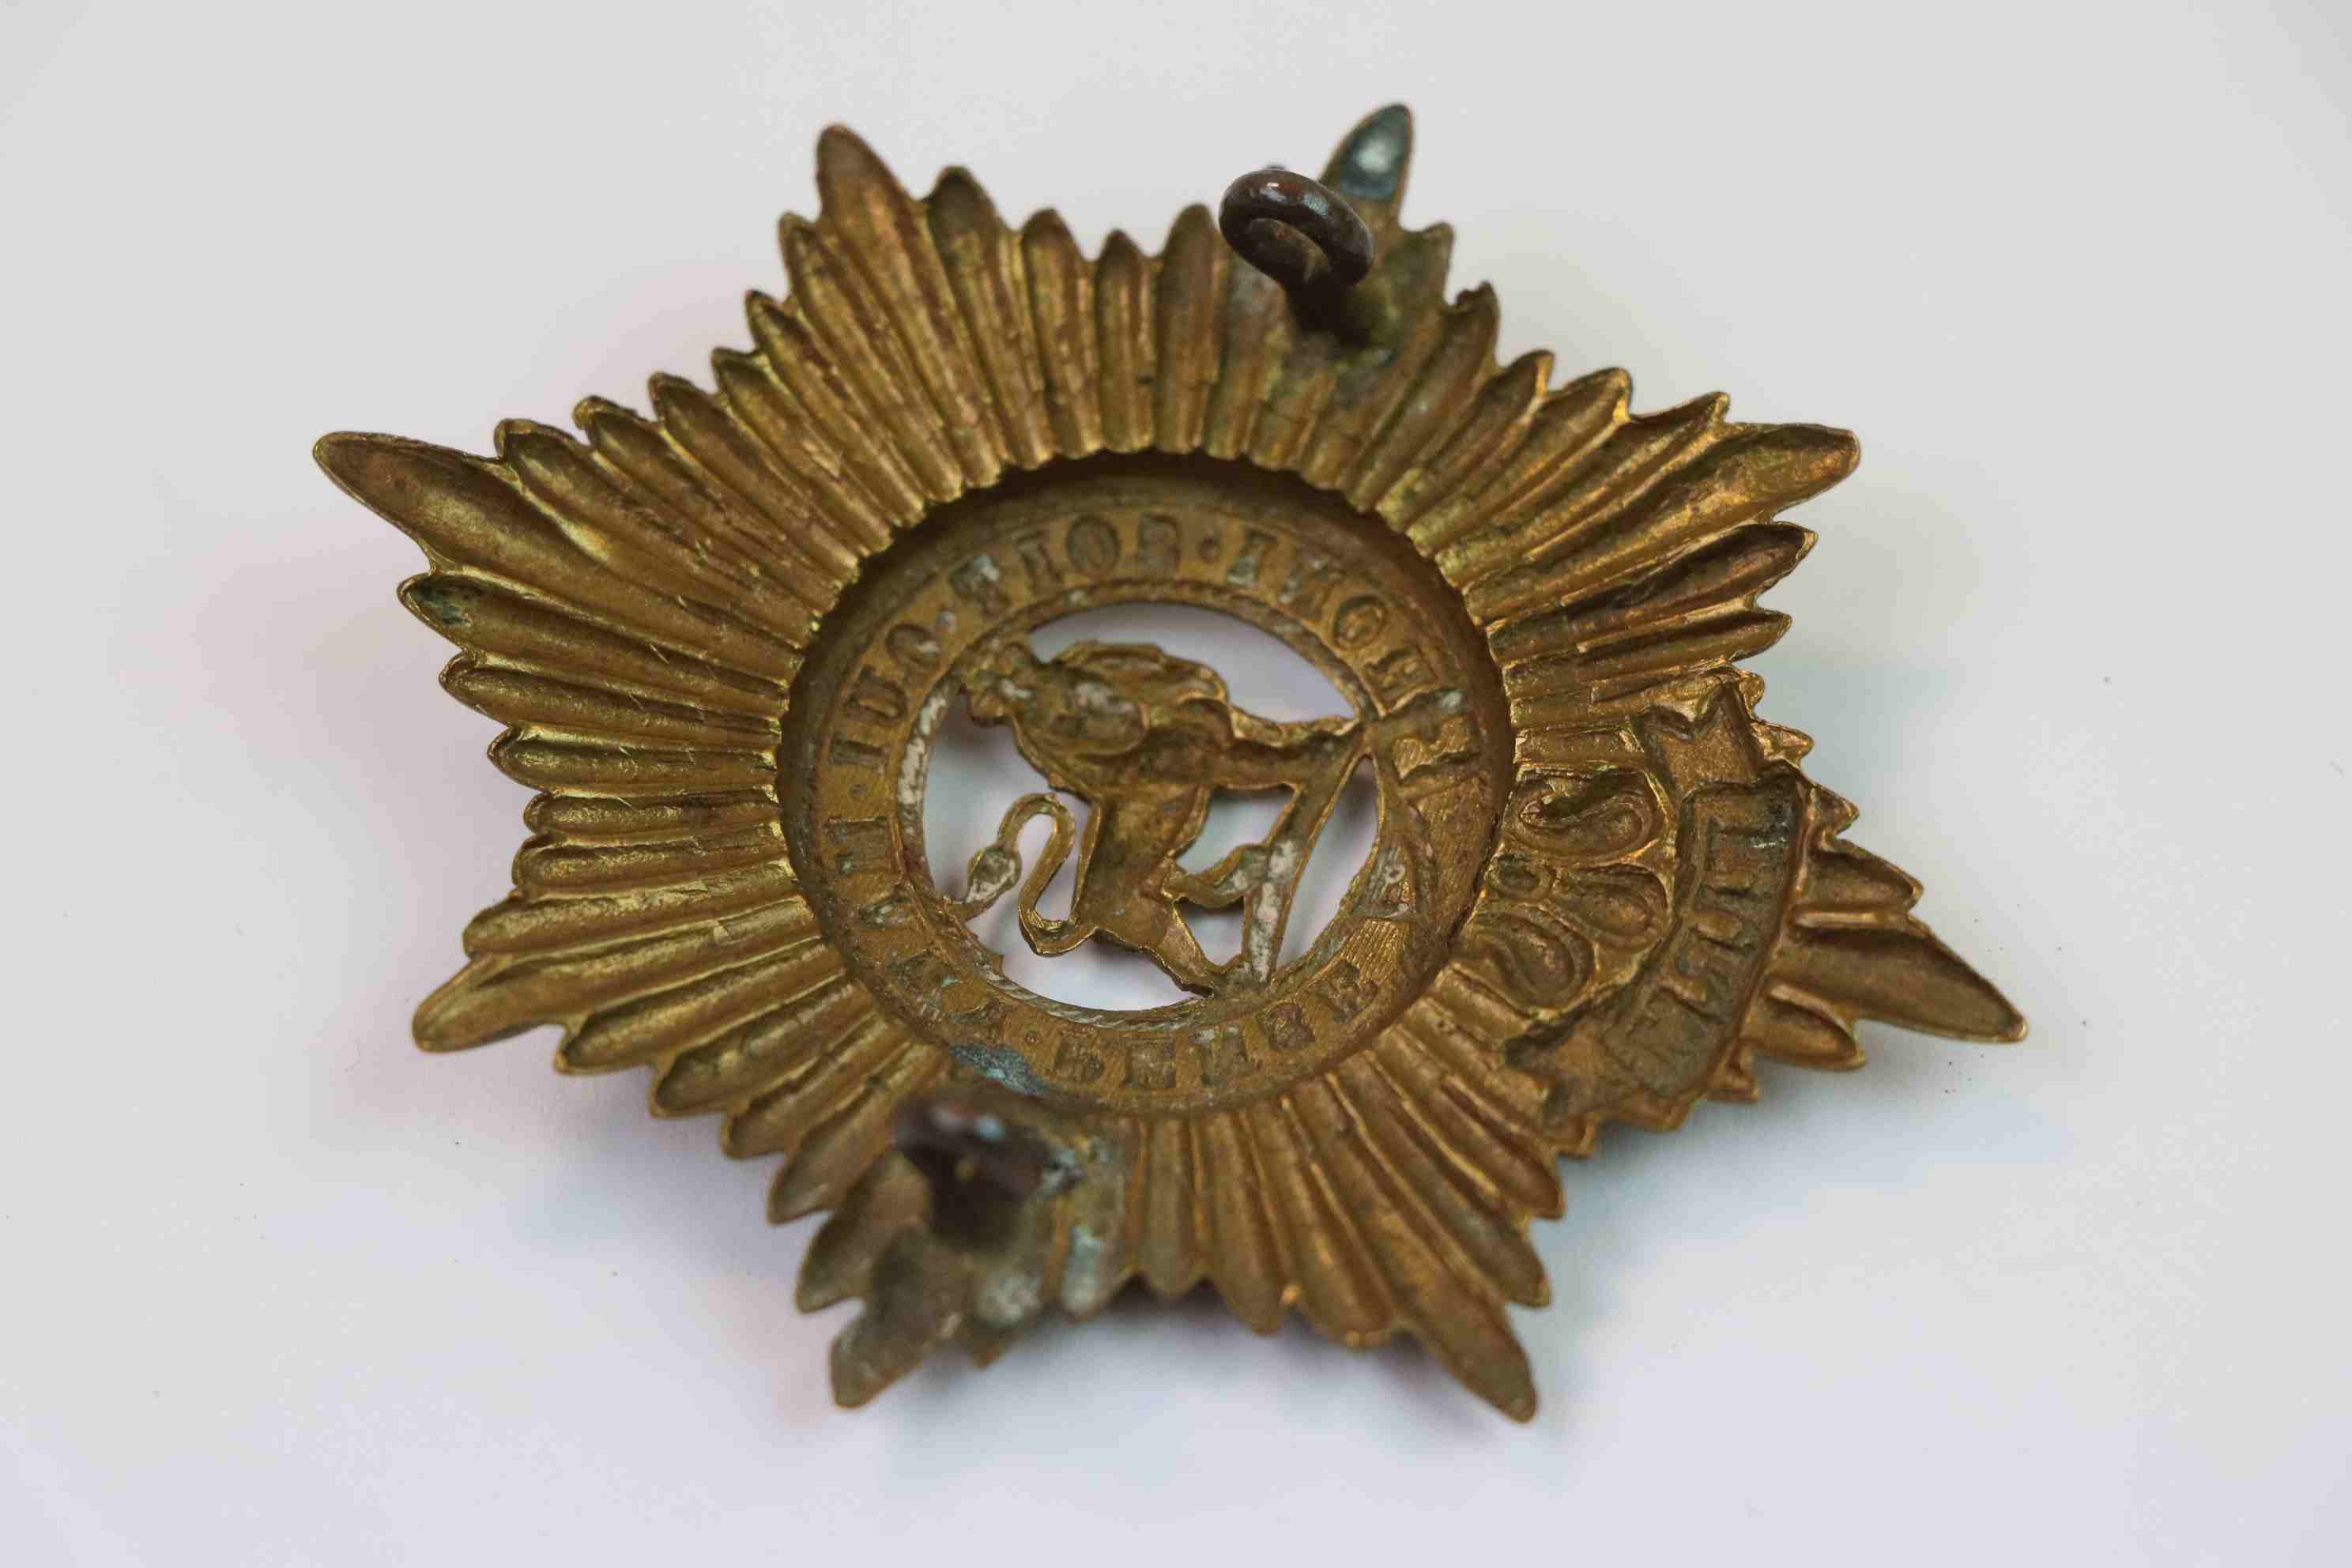 A Worcestershire Regiment Brass Band Cap Badge. - Image 7 of 7